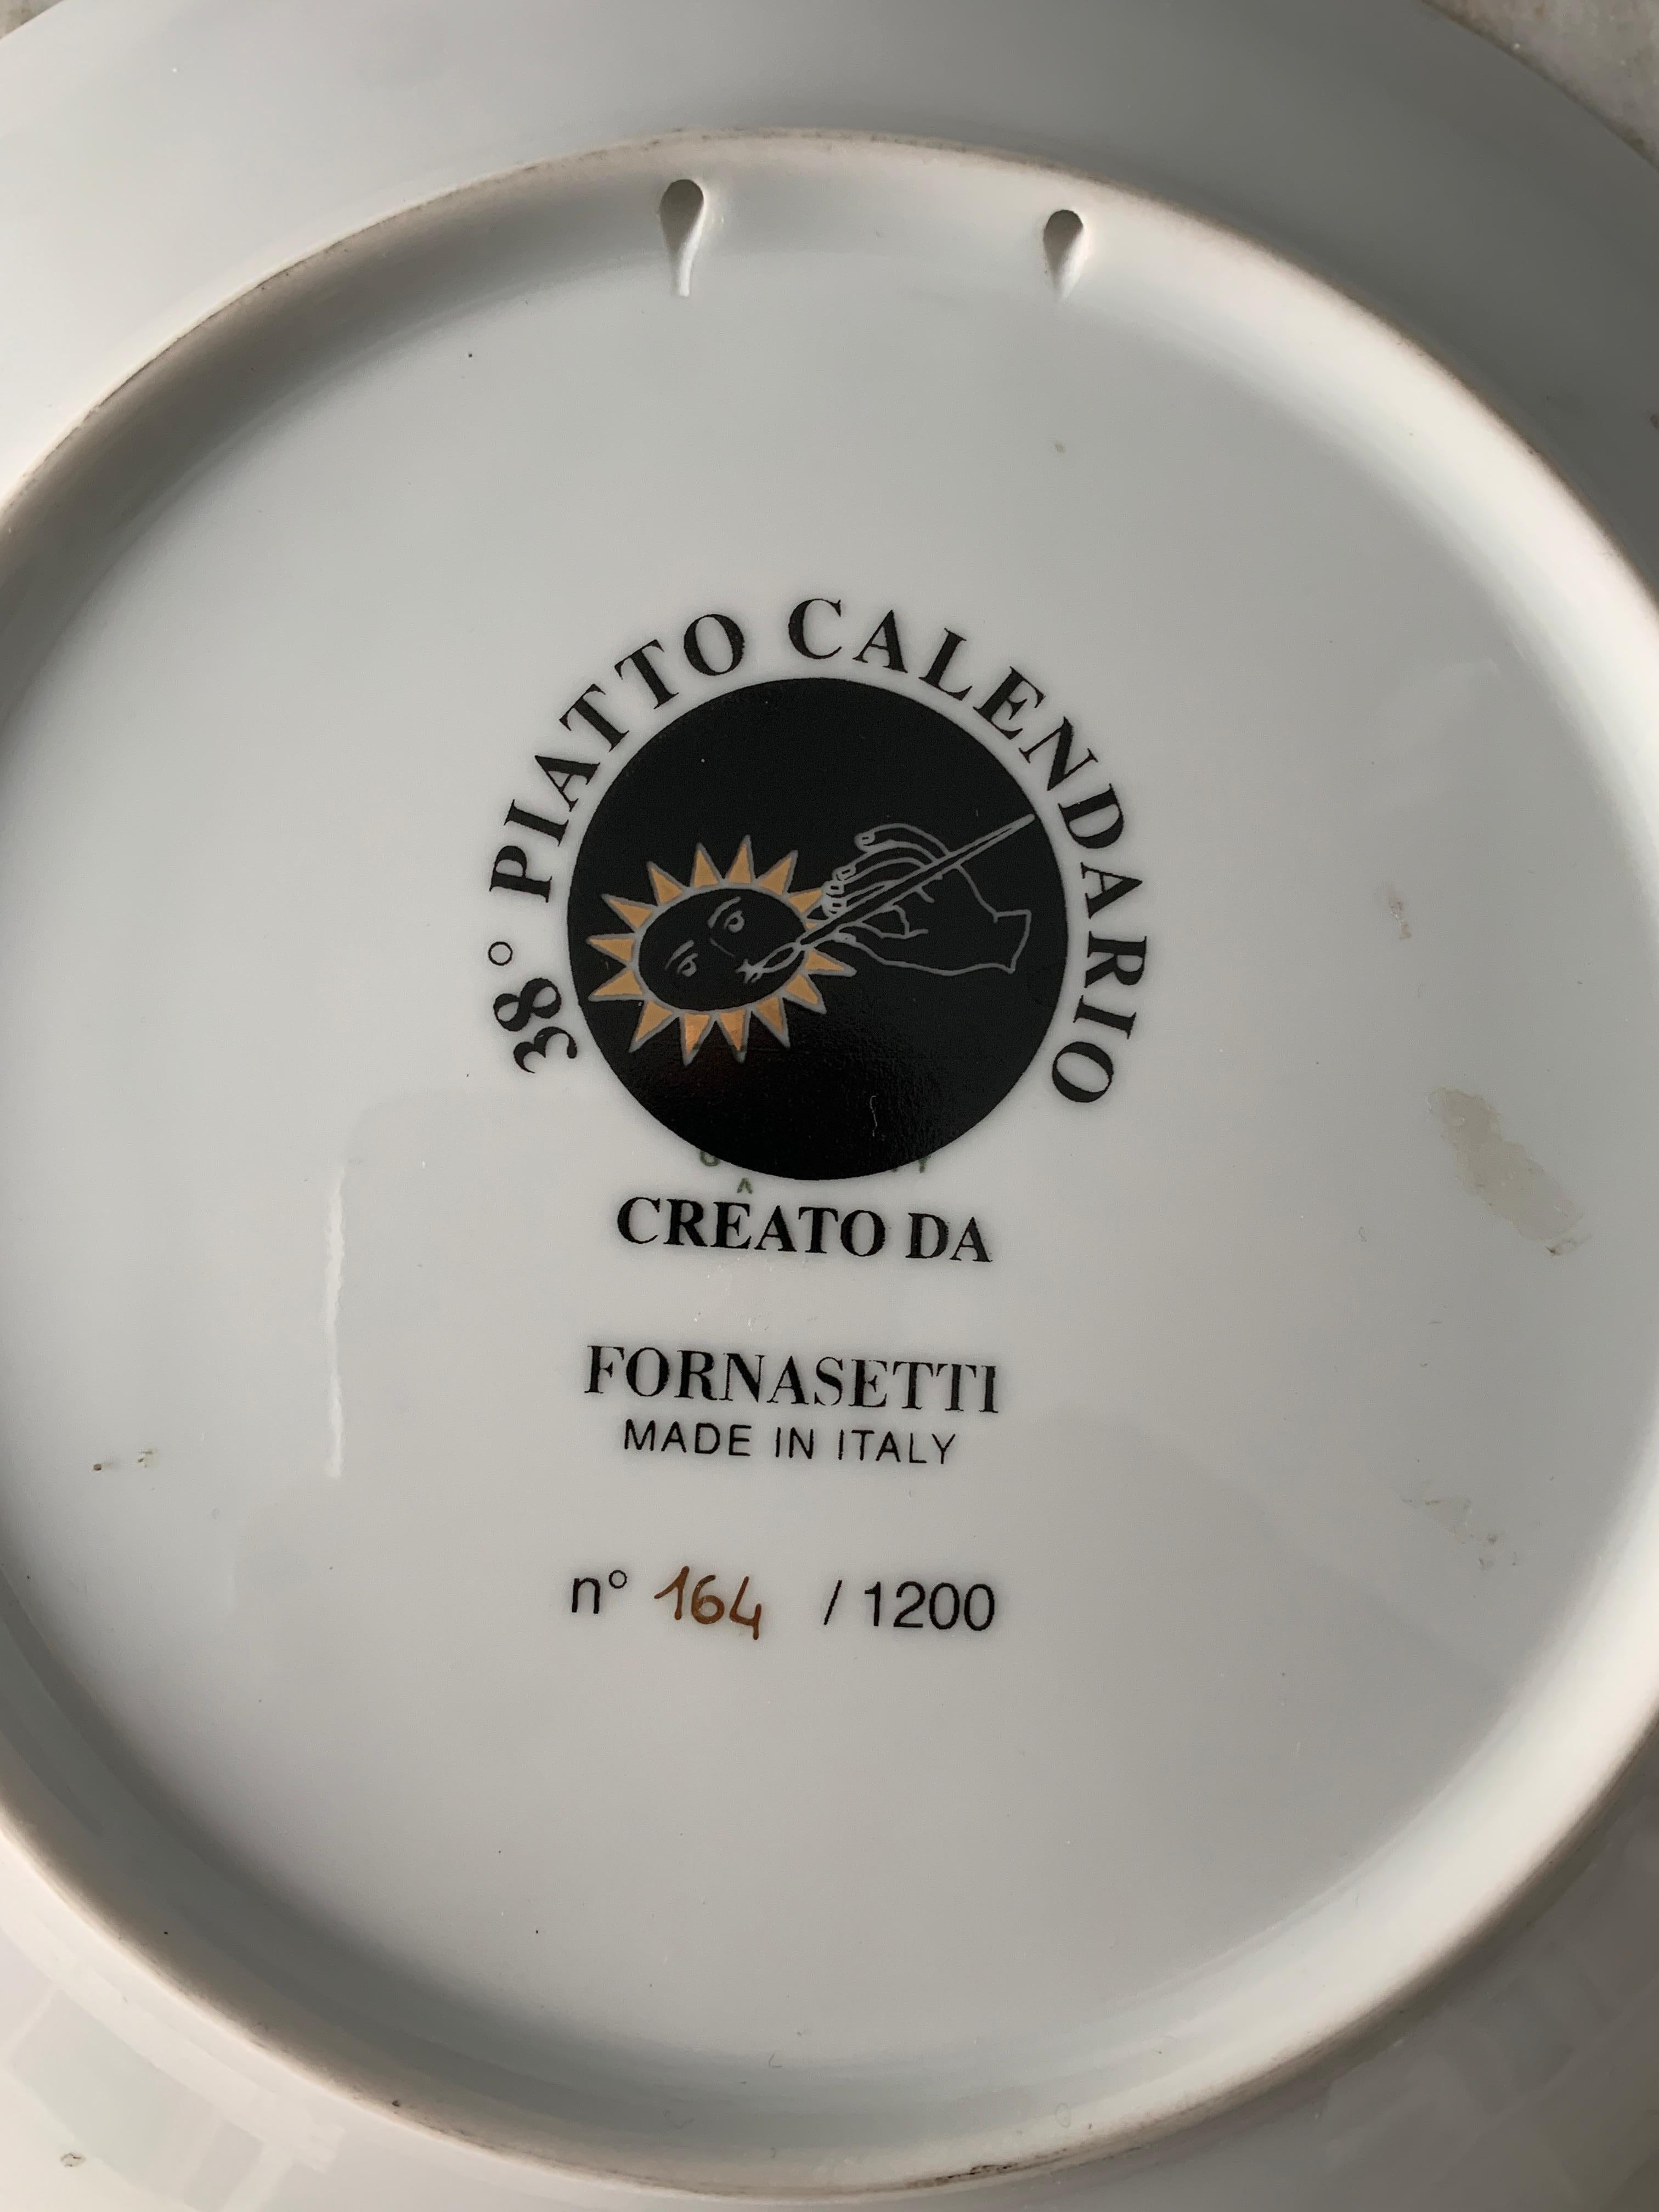 Gold 2 Plato Calendario Porcelain Plates signed and numbered Fornasetti from Italy For Sale